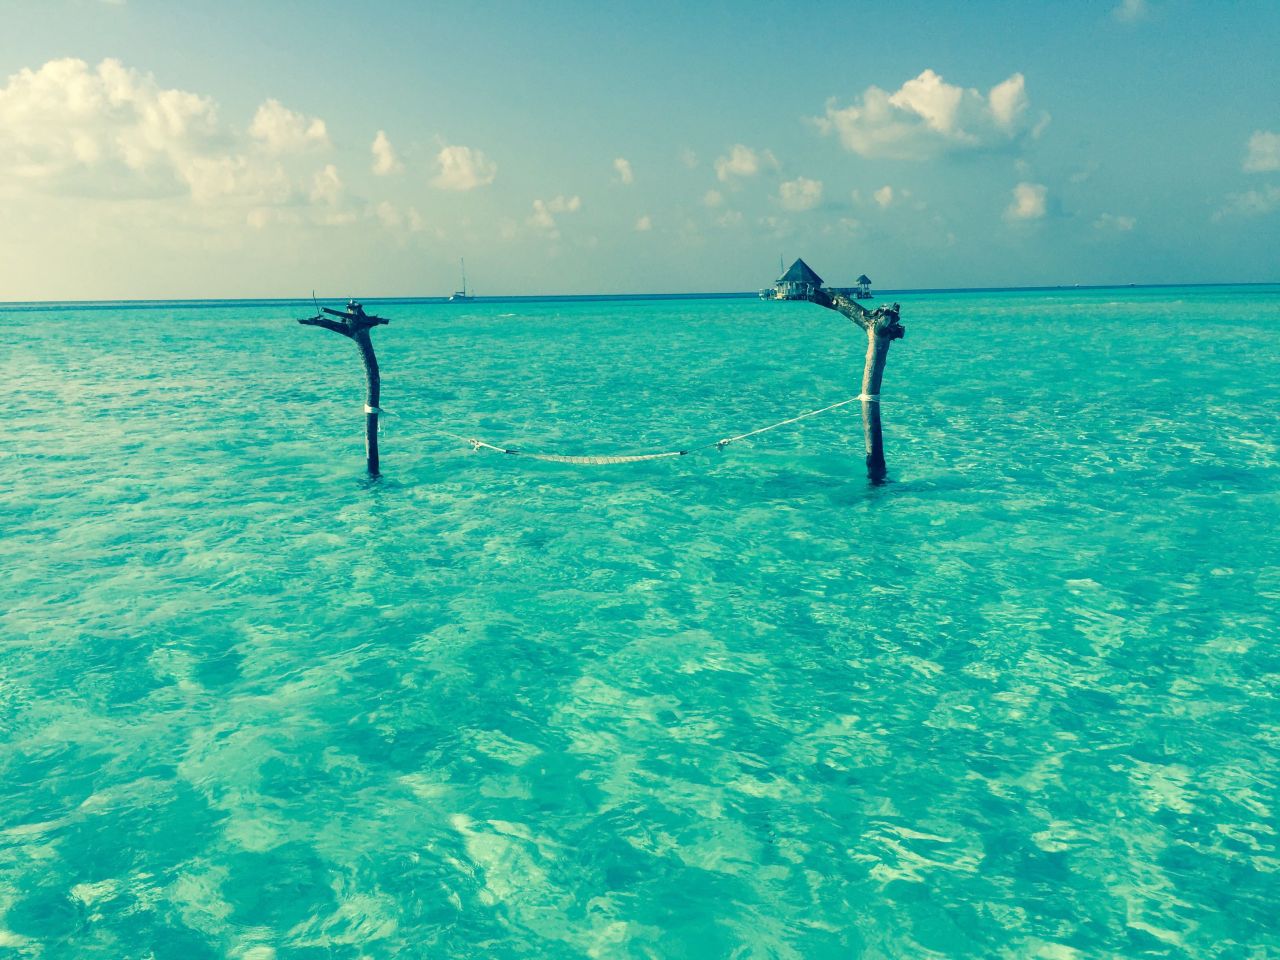 Paradise beckons in the form of a hammock tethered to two pieces of drift wood. "I was taken aback by the clarity and color of the water. It looked as if it were plucked right out of a Photoshopped luxury travel magazine," said <a href="http://ireport.cnn.com/docs/DOC-1226475">Holly Heft. </a>